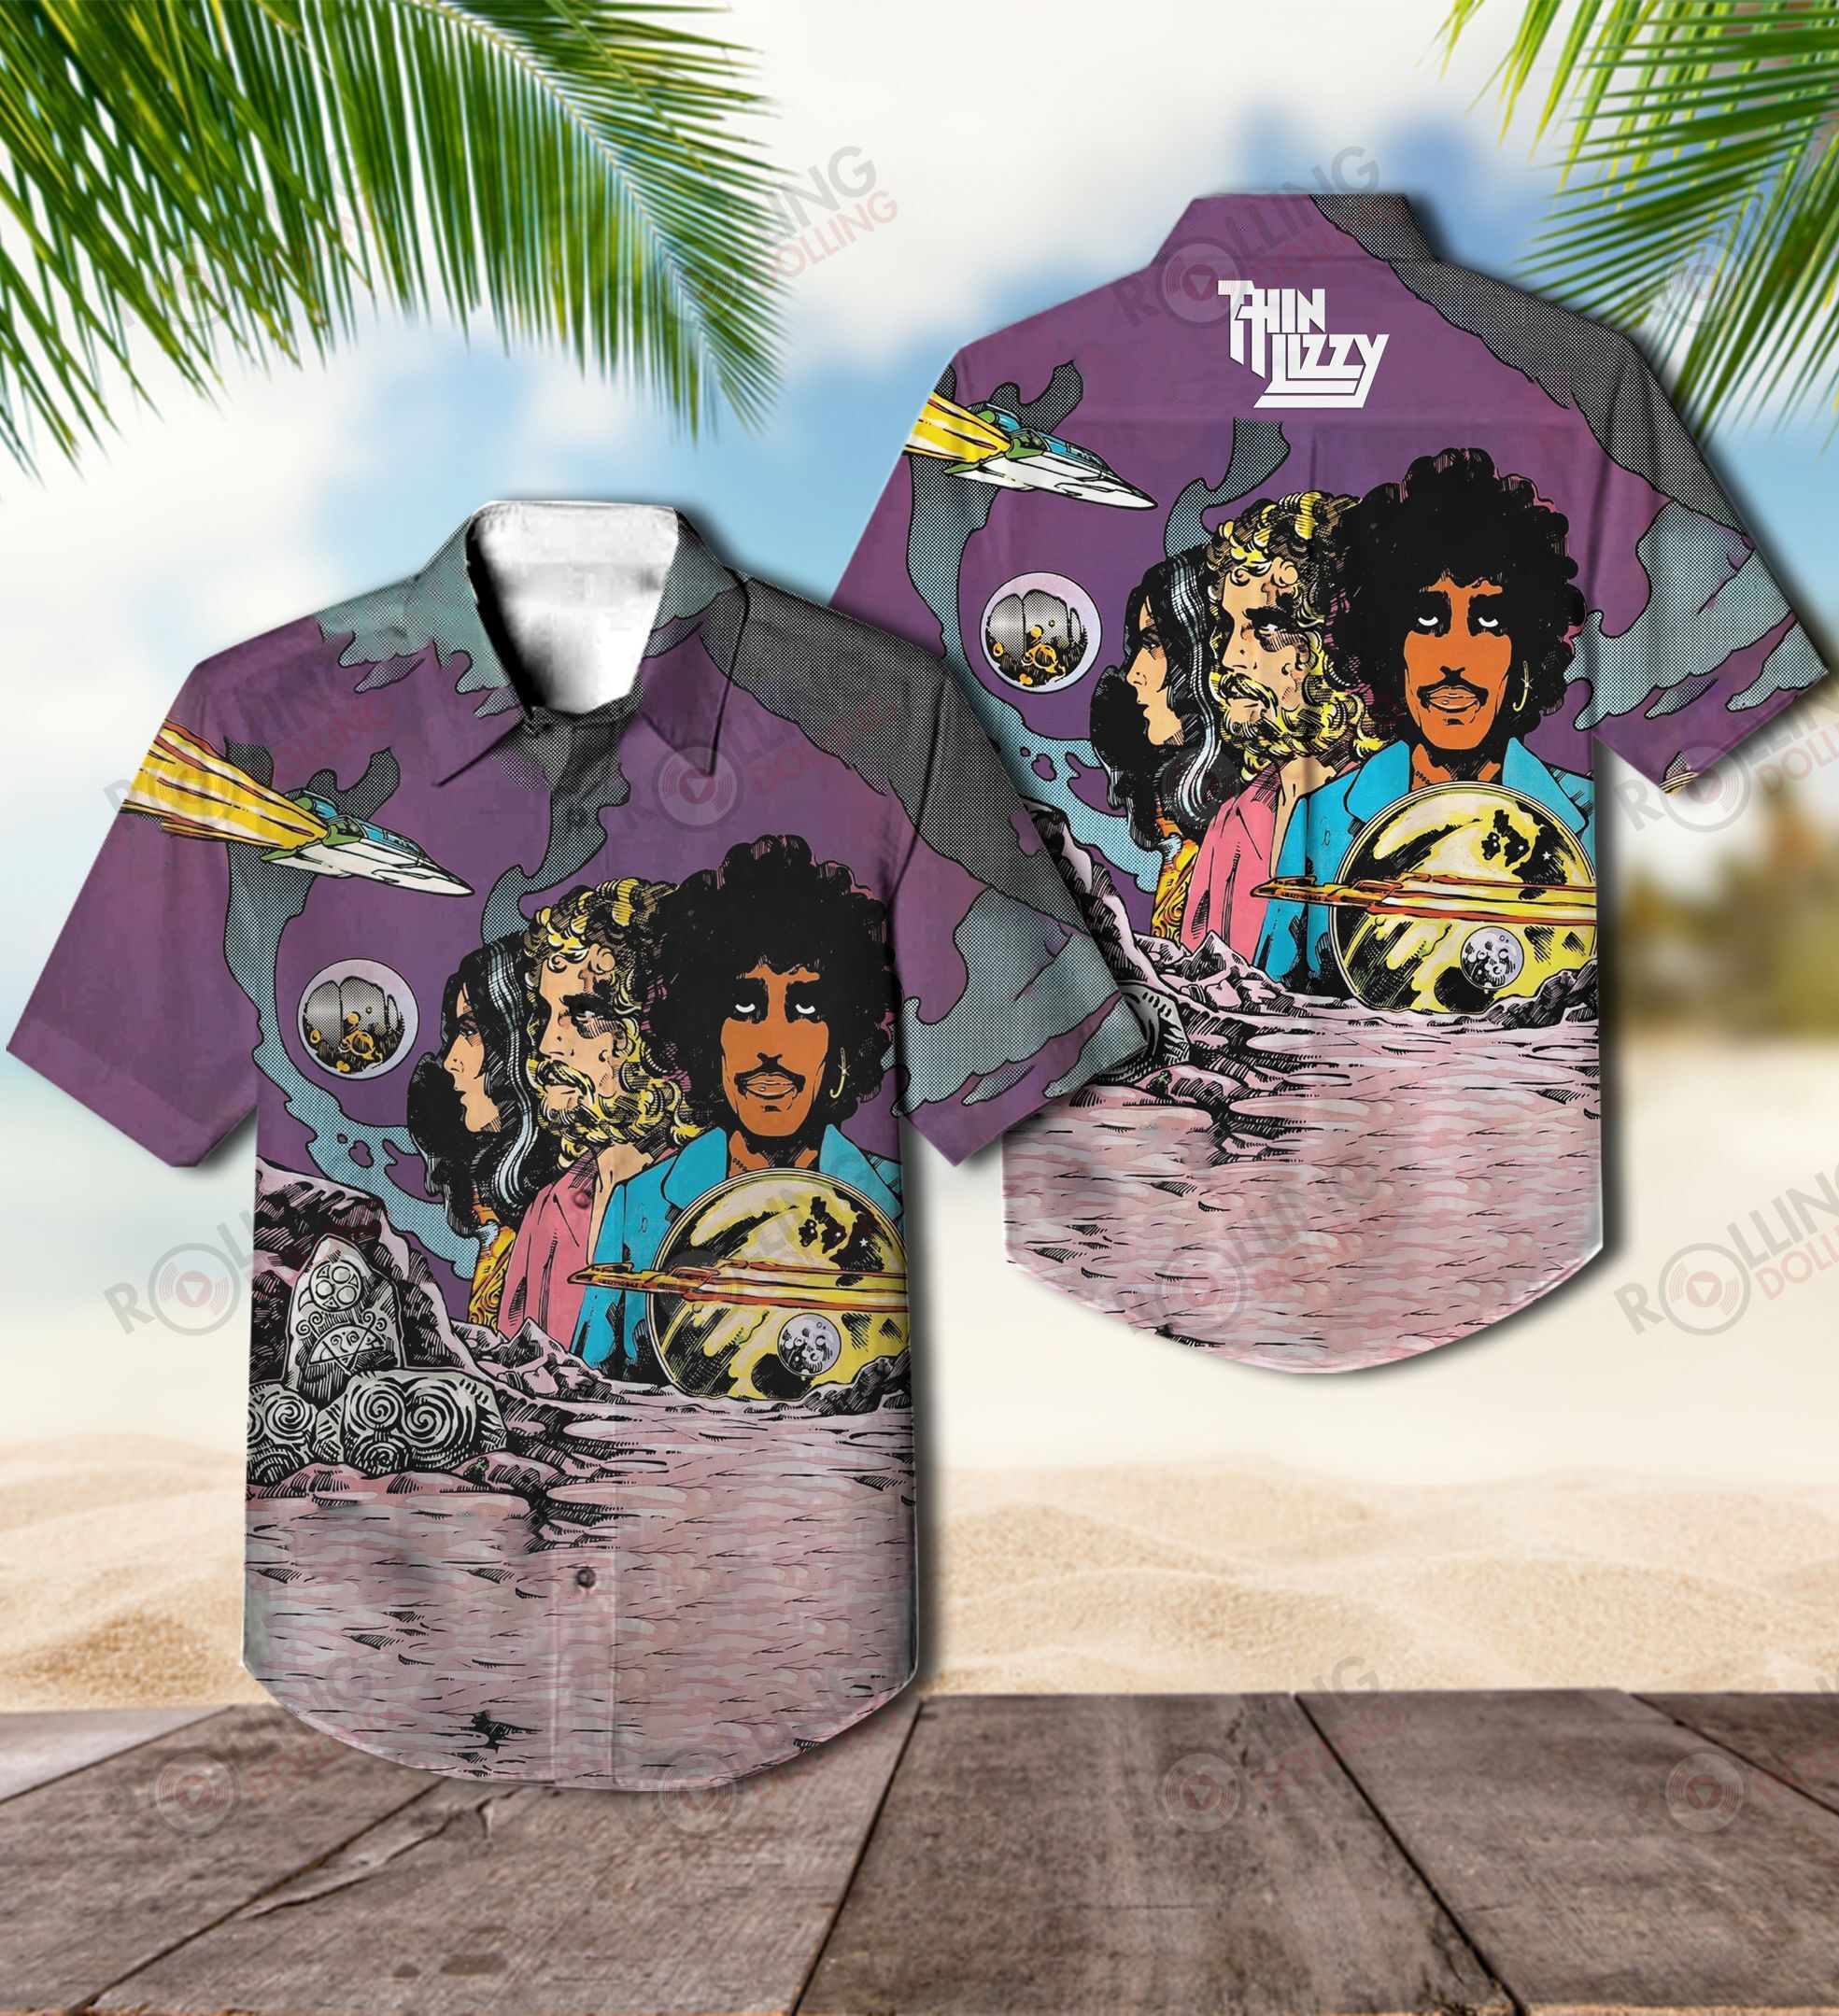 You'll have the perfect vacation outfit with this Hawaiian shirt 157